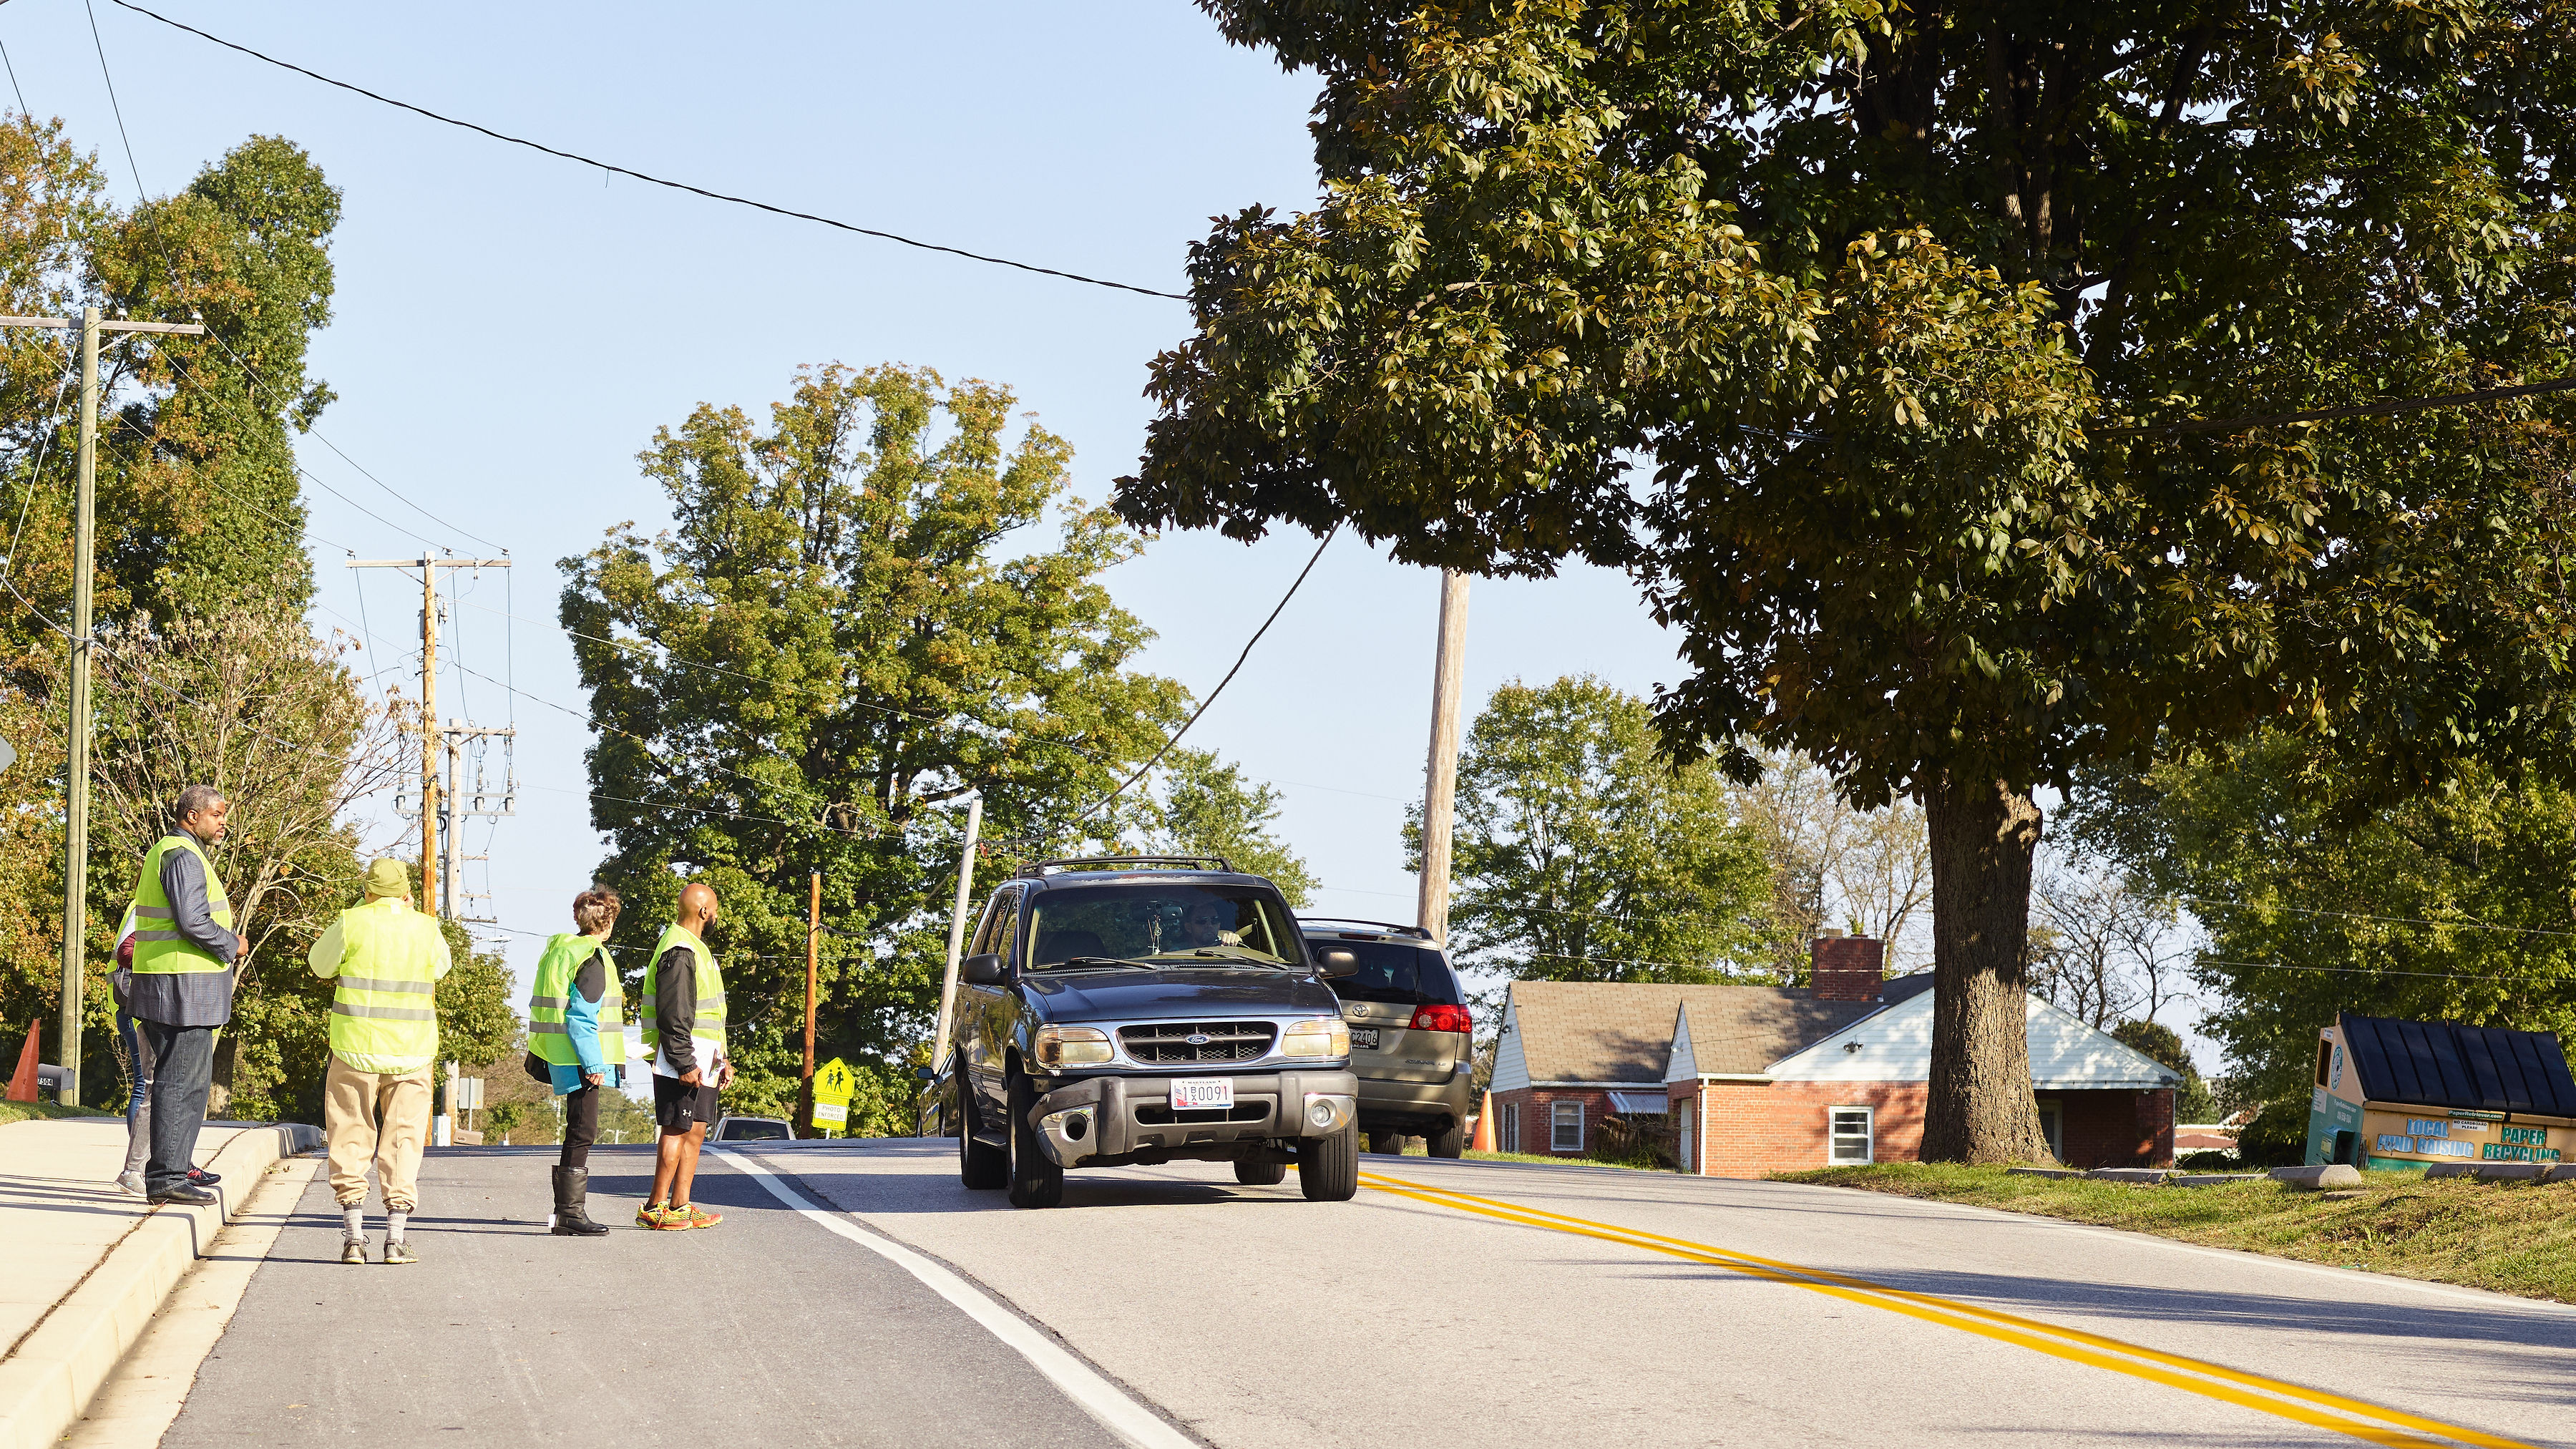 Howard County approves record level of funding for bike and pedestrian infrastructure projects in FY 2022 capital budget